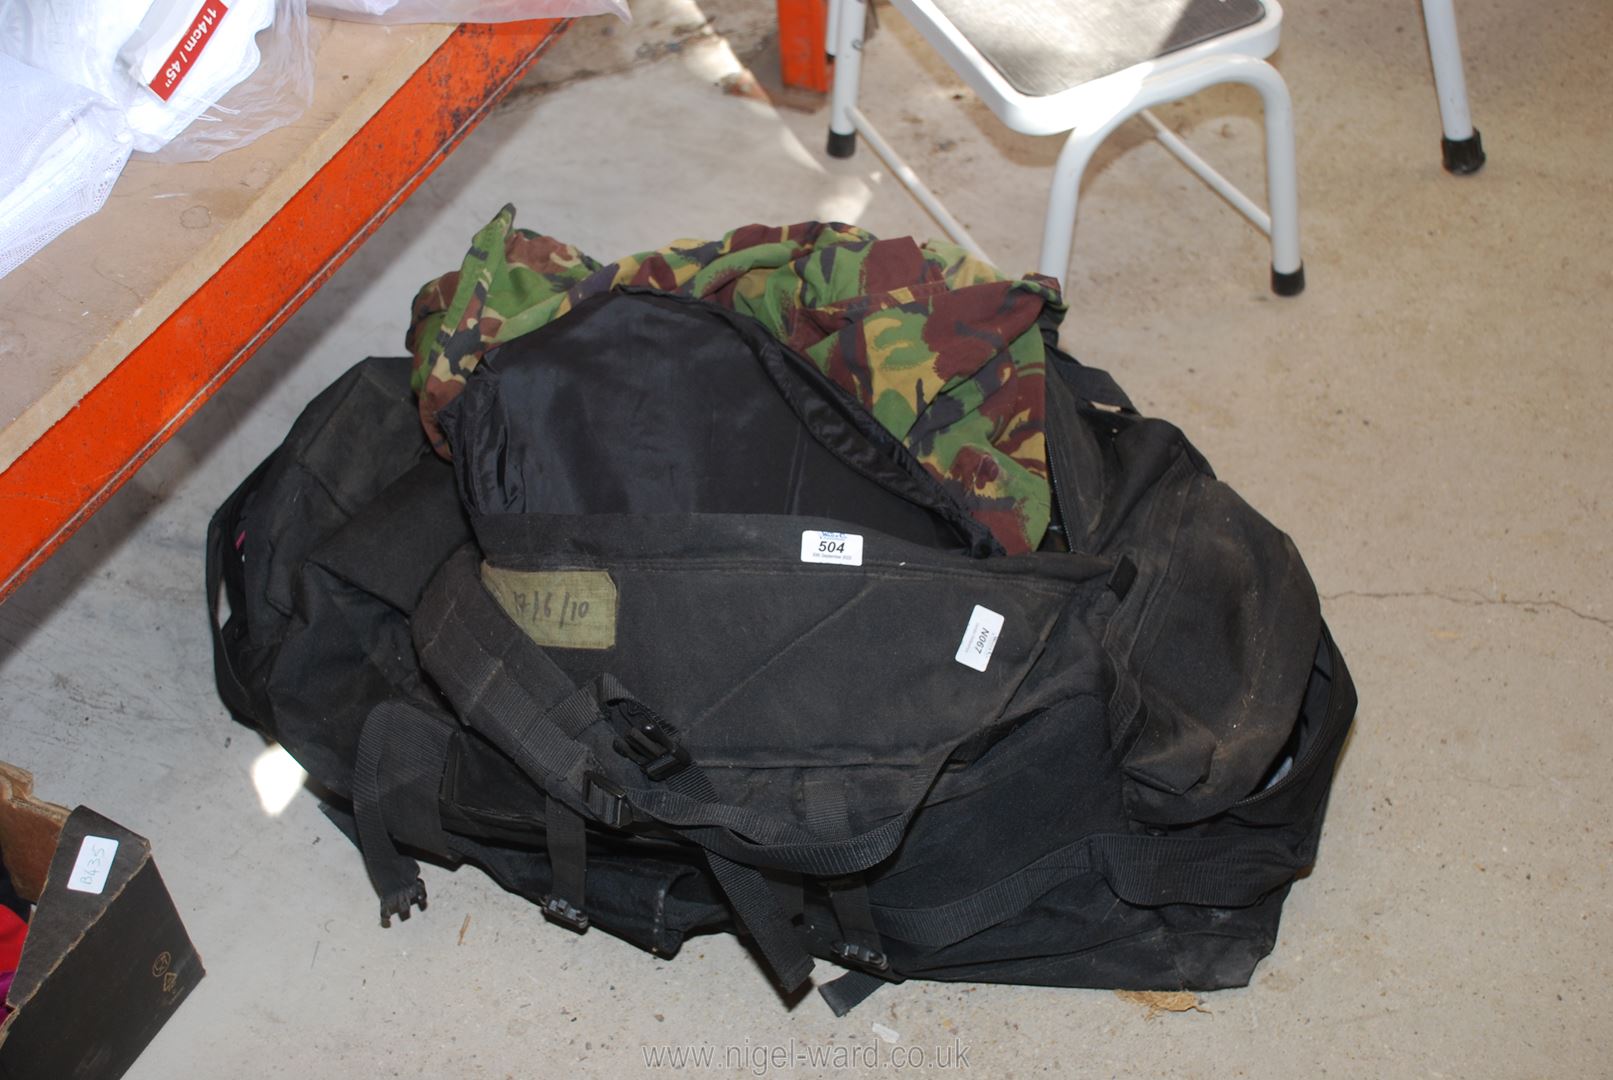 Camouflage clothing in a large holdall, etc.